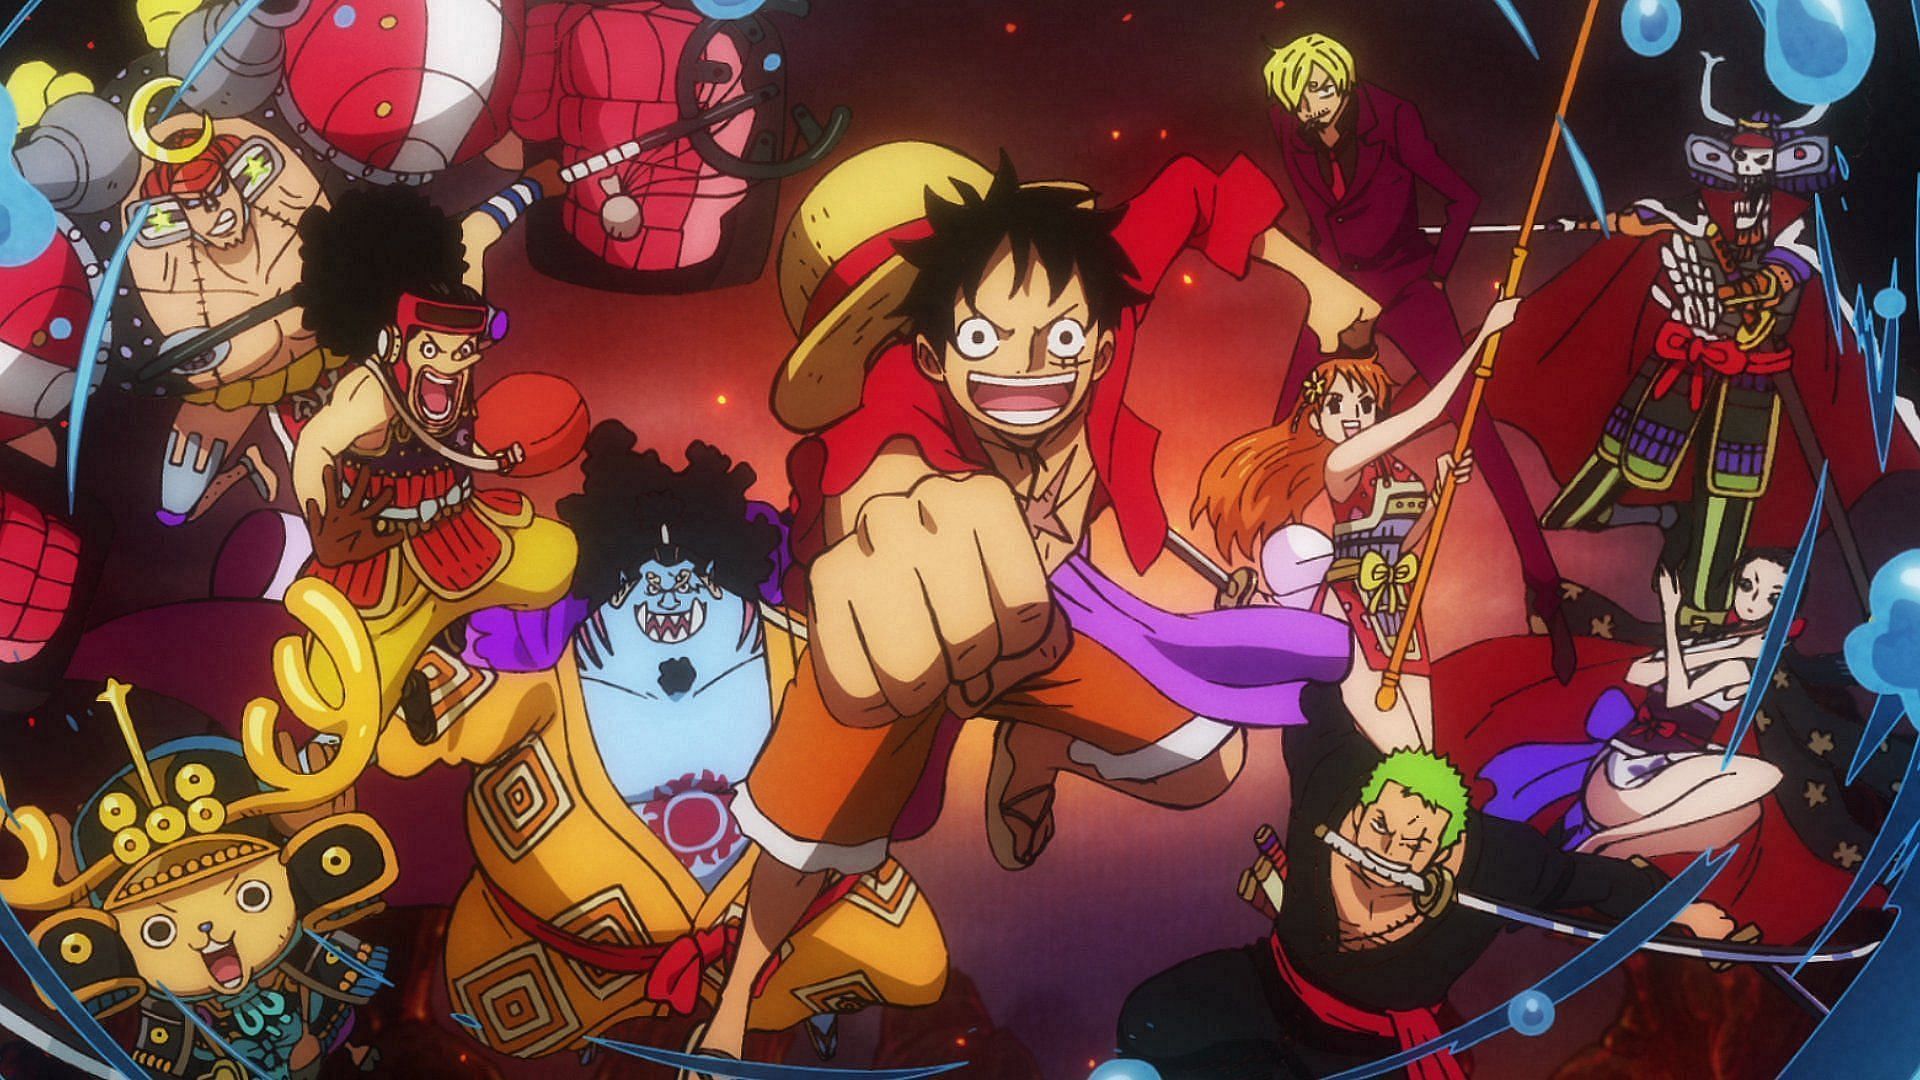 To celebrate the 500th episode of One Piece, episodes #1 – 202 and #391 –  500 will be available until June 8 on Hulu : r/OnePiece